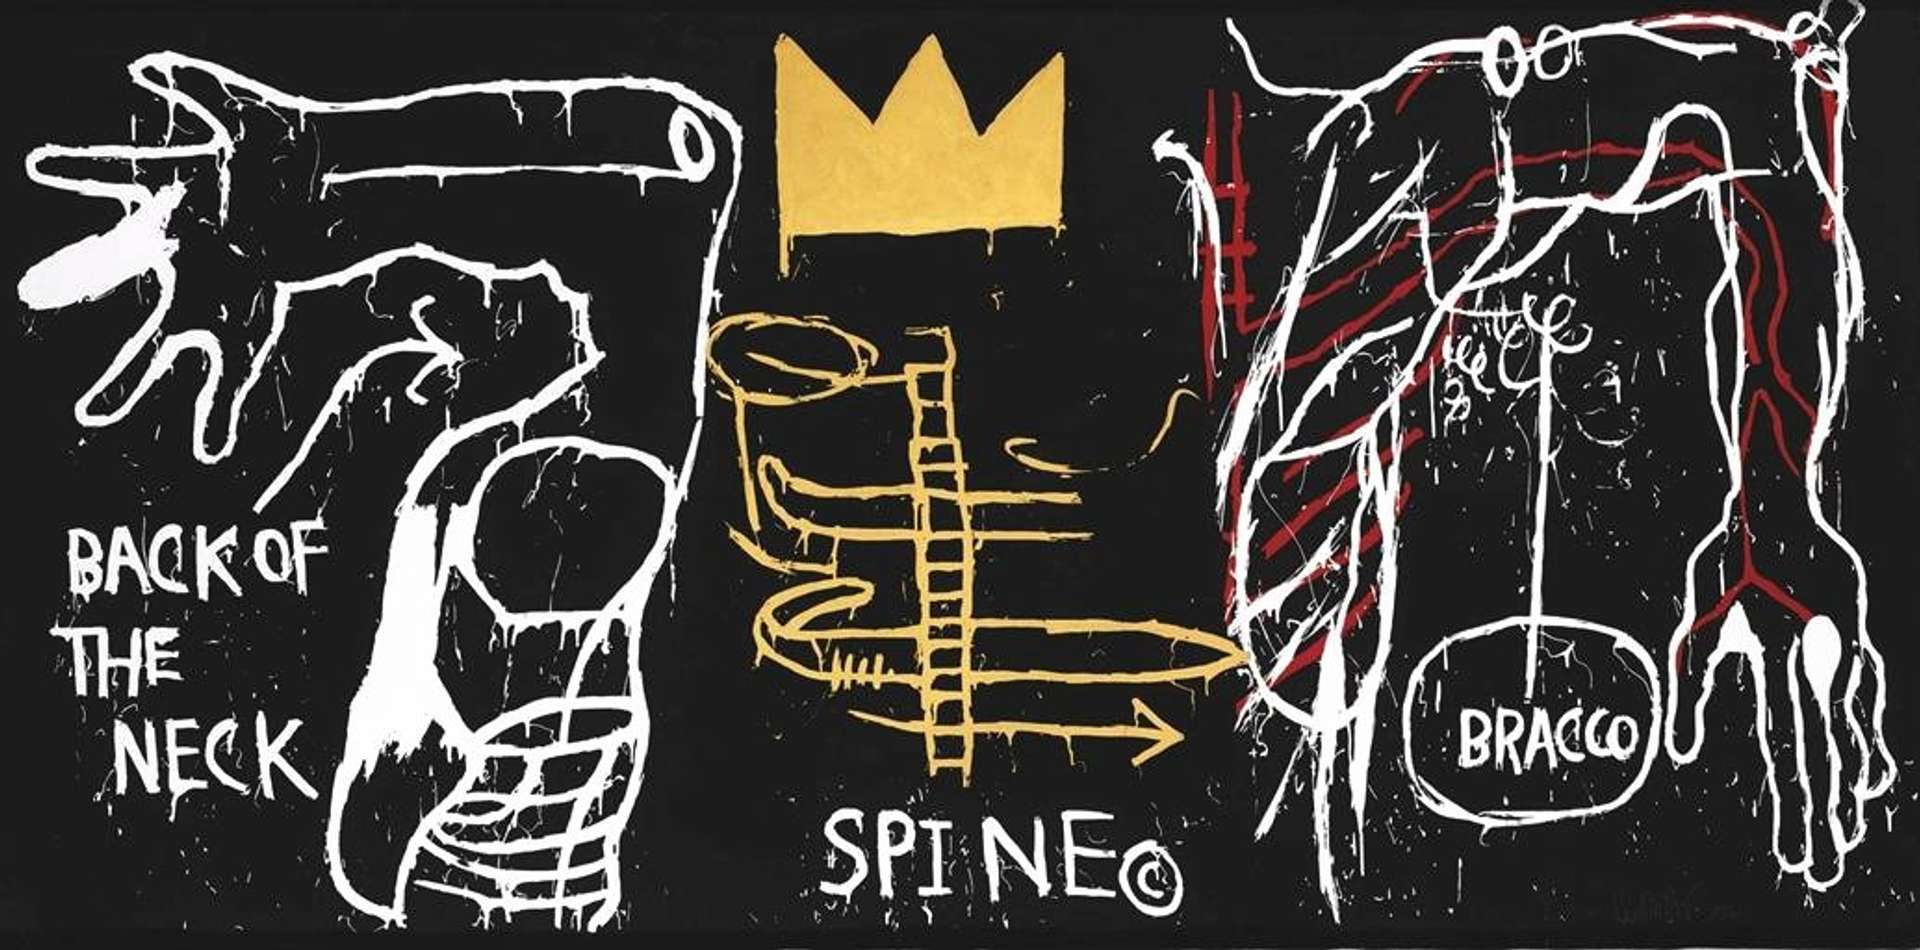 Back Of The Neck by Jean-Michel Basquiat